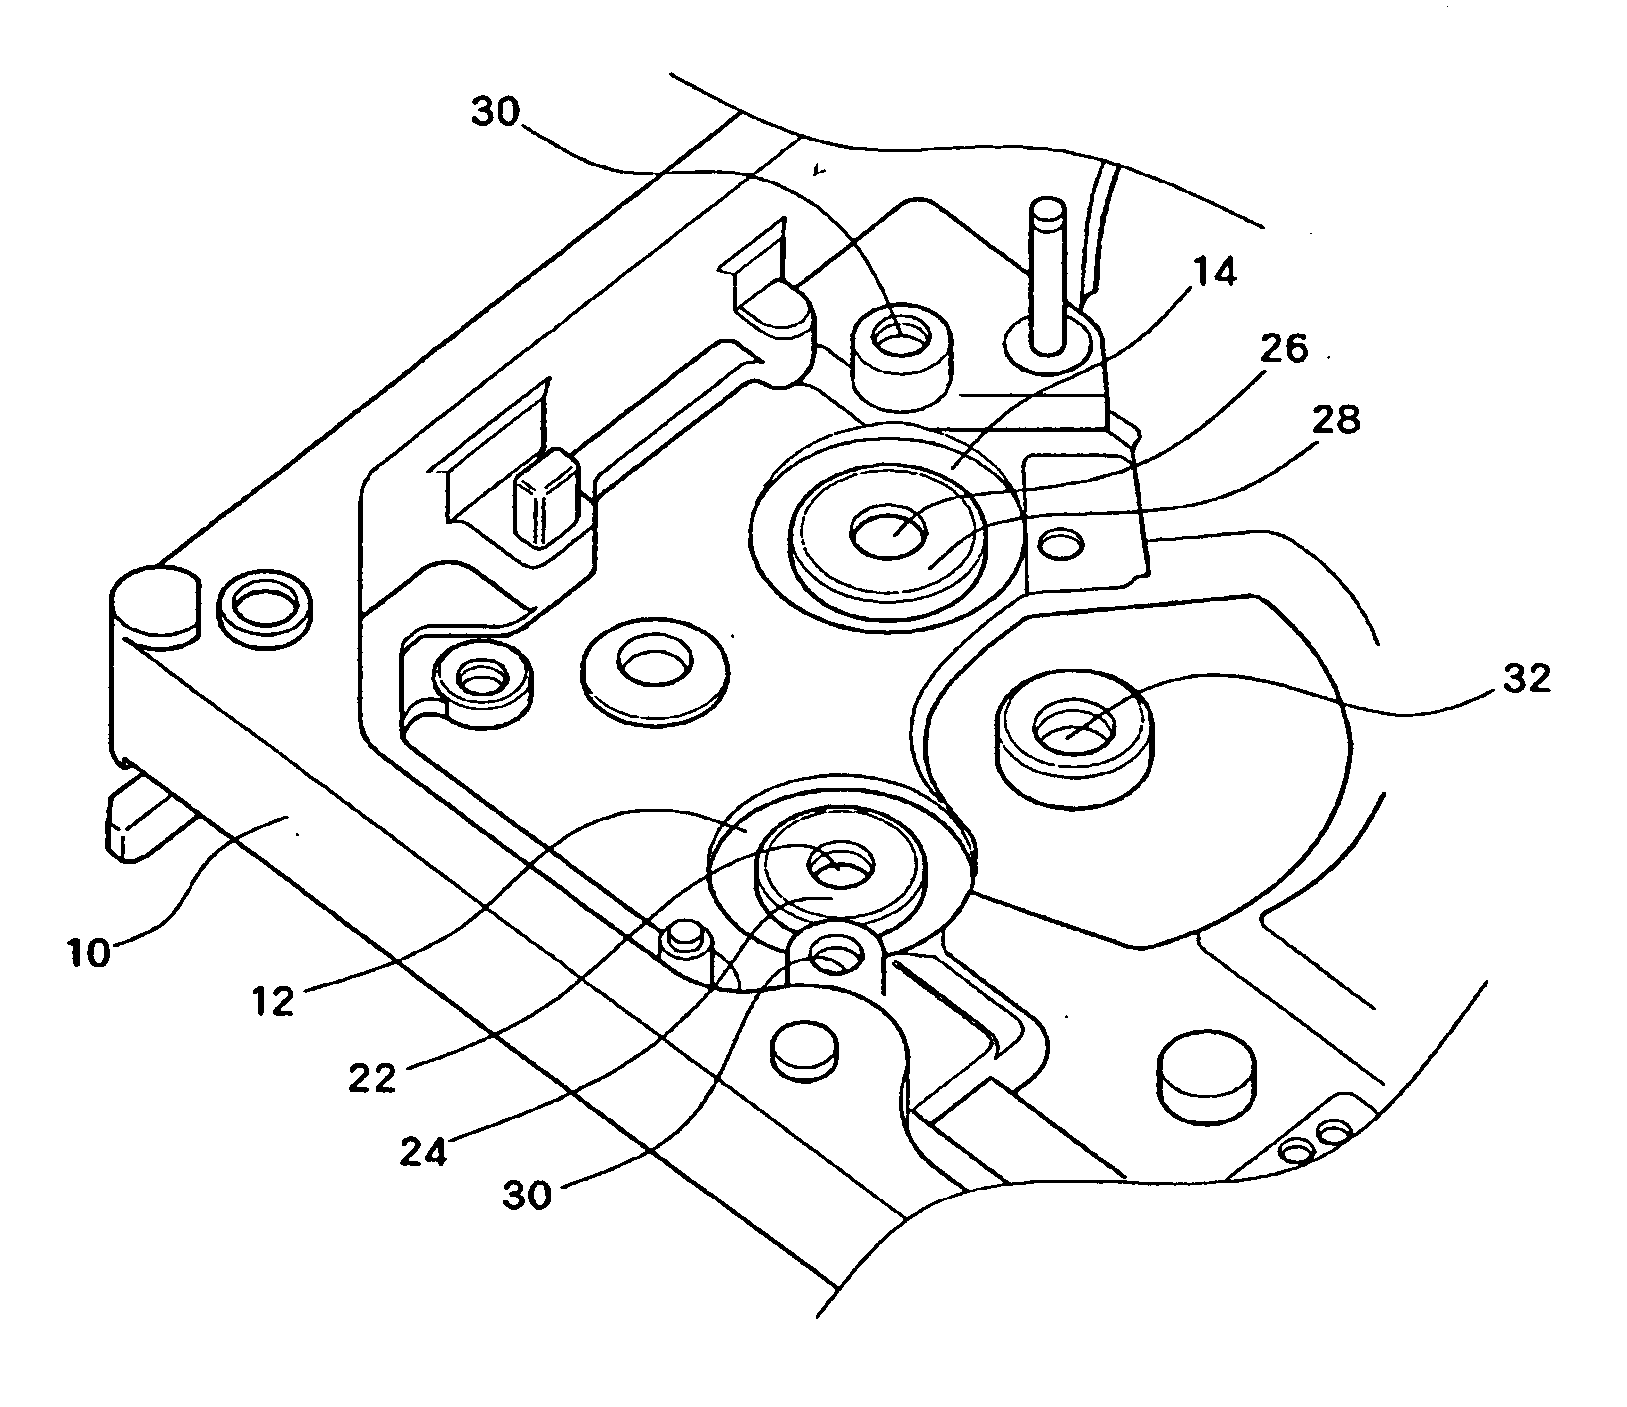 Hard disk drive with structure for mounting voice coil motor